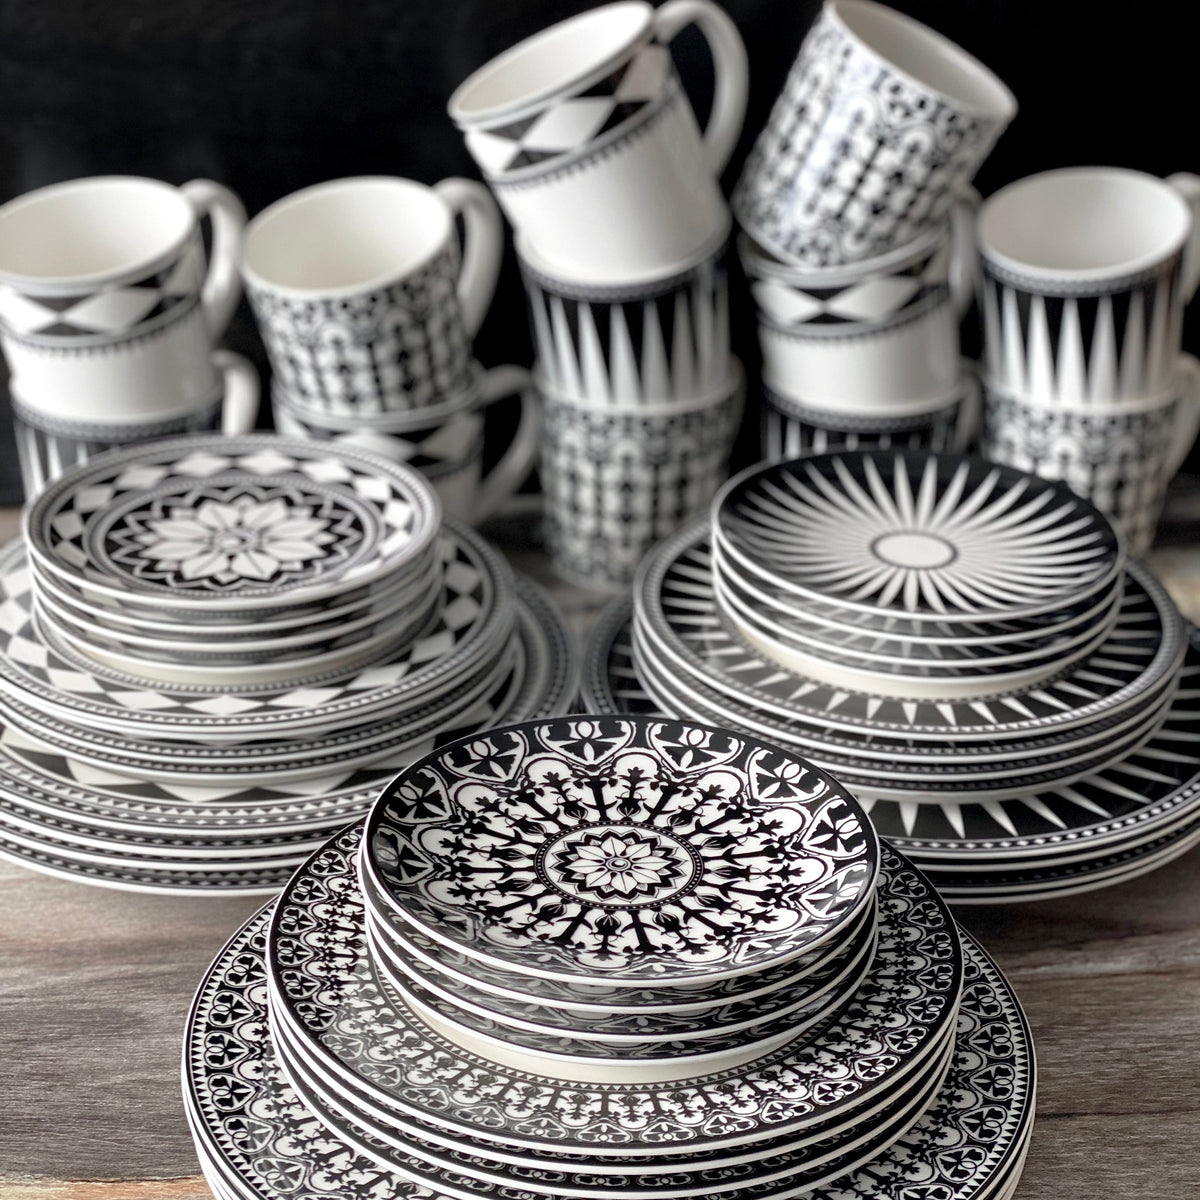 The Casablanca Canapé Plates from Caskata Artisanal Home comprise a stylish set of black and white plates and cups on a table.